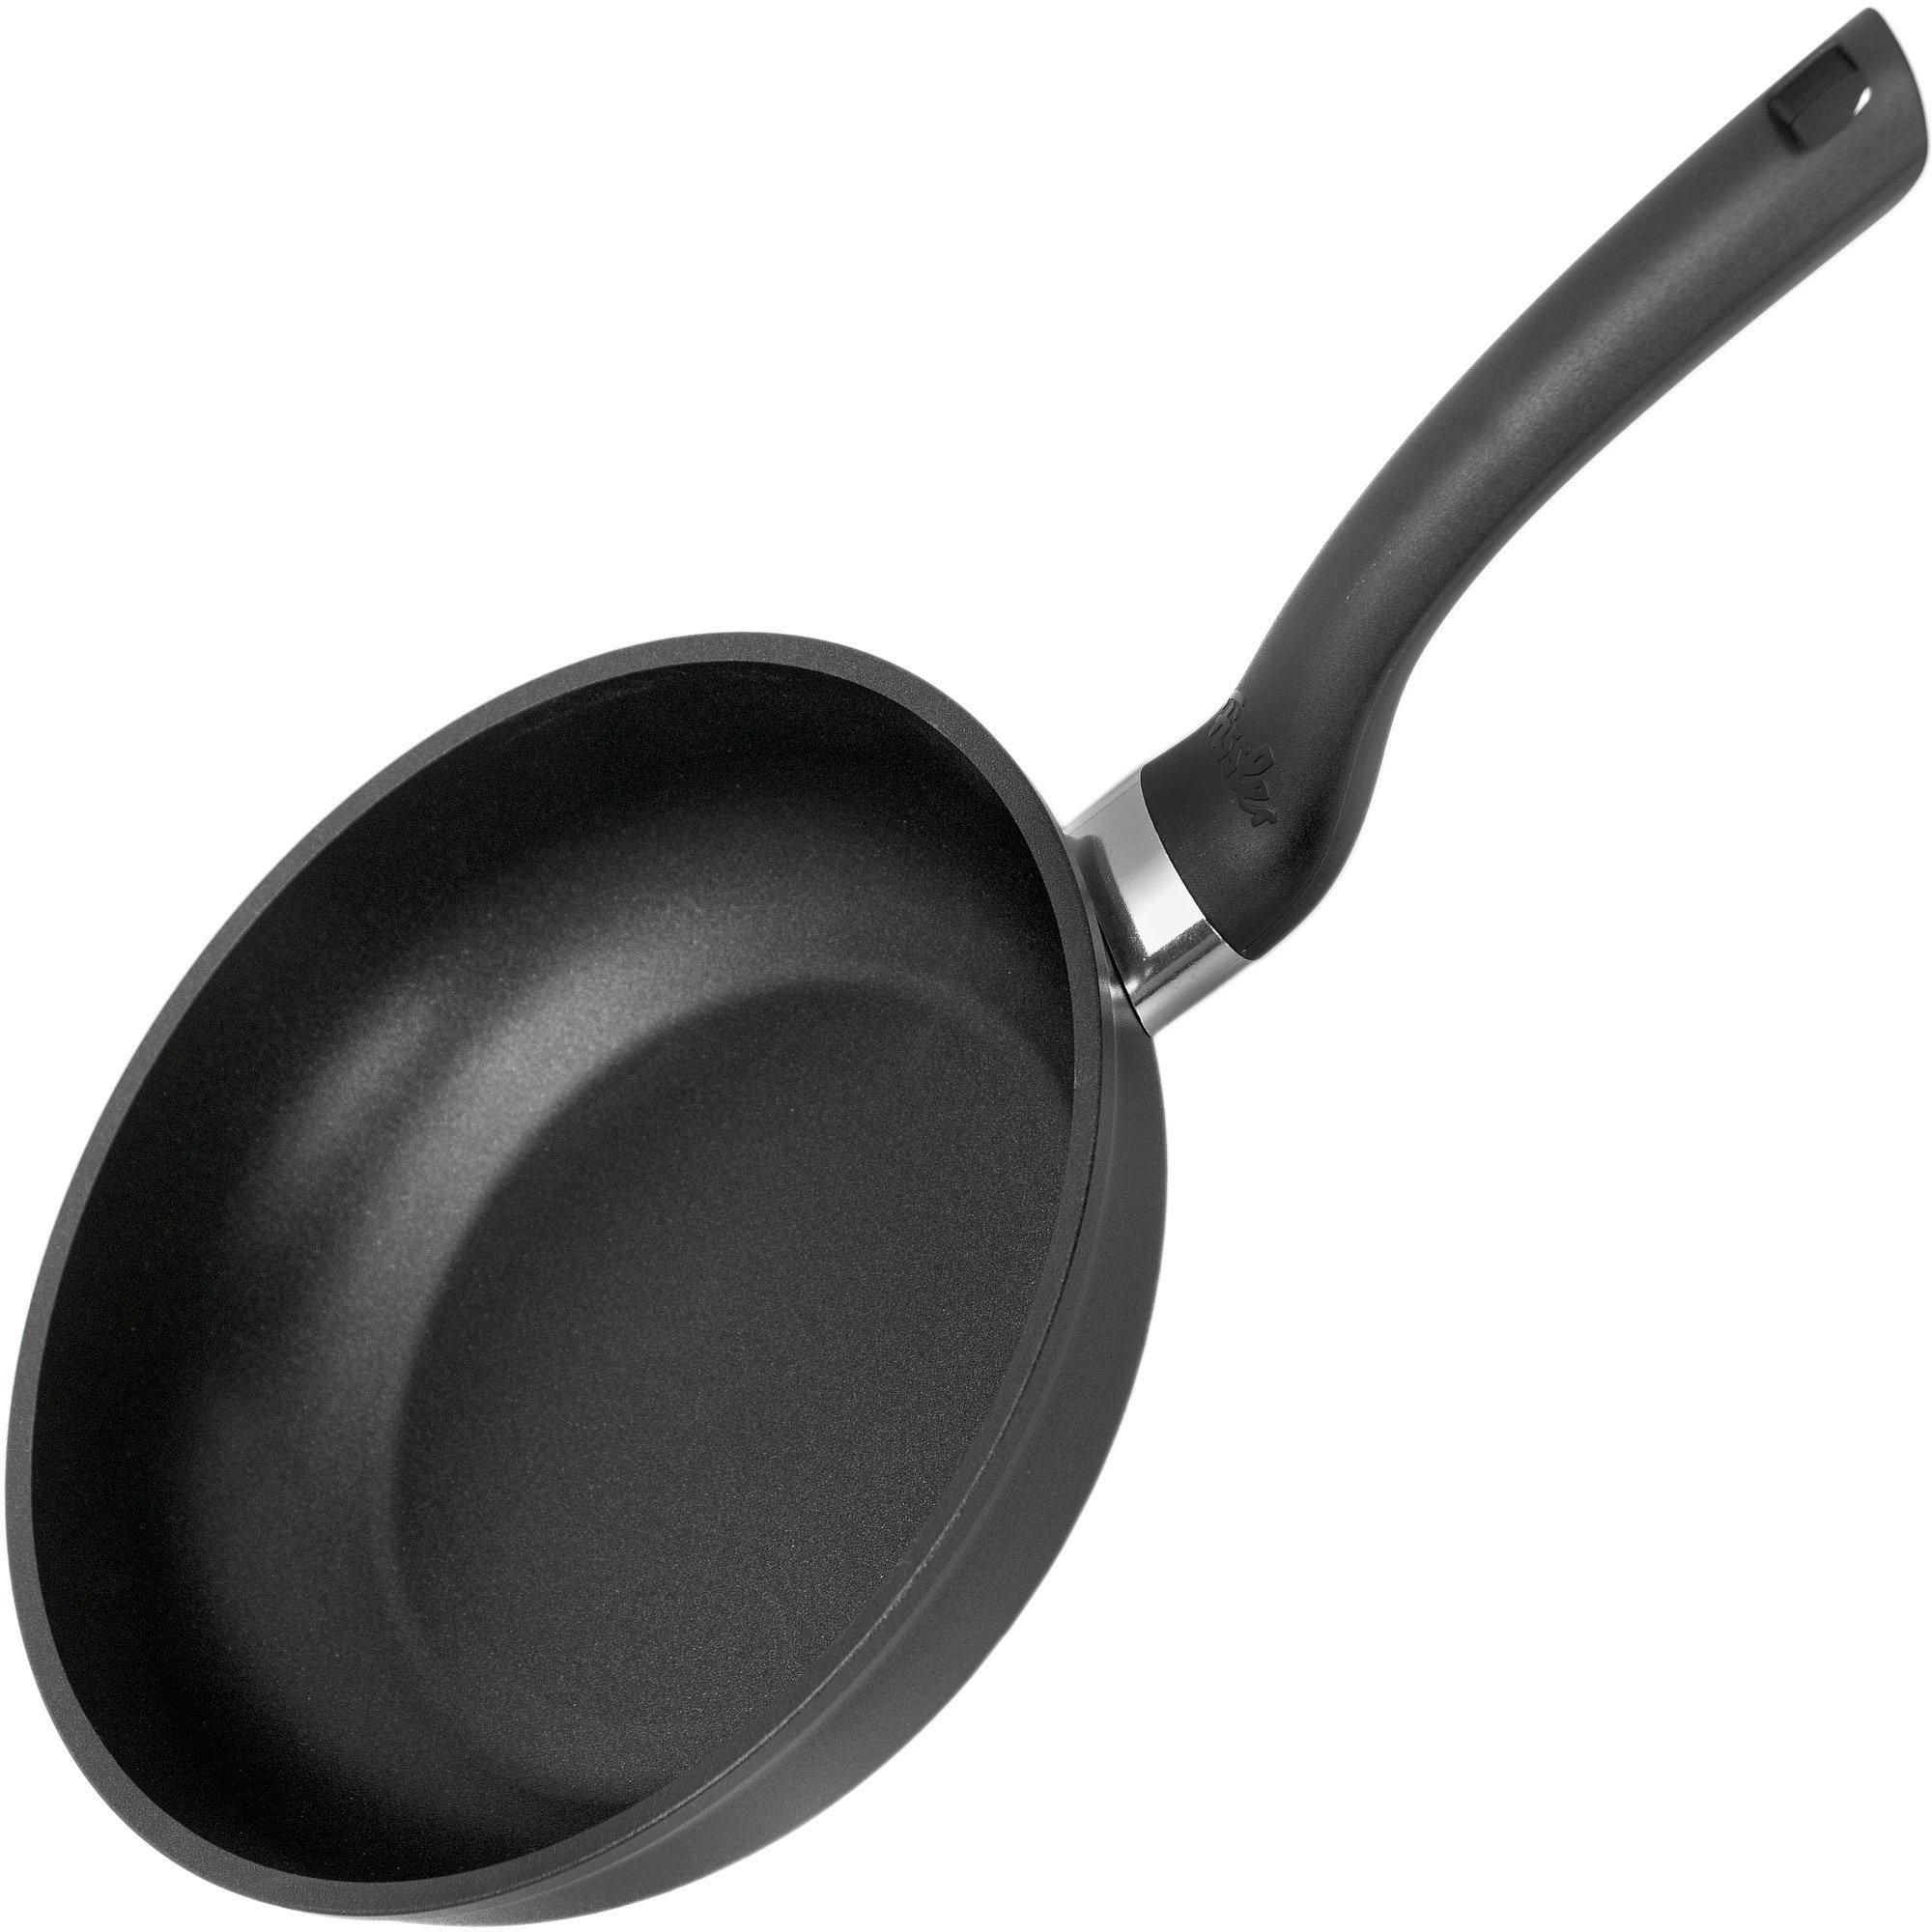 Fissler Cenit Induction cm | Advantageously 045-301-28-100, shopping frying at pan 28